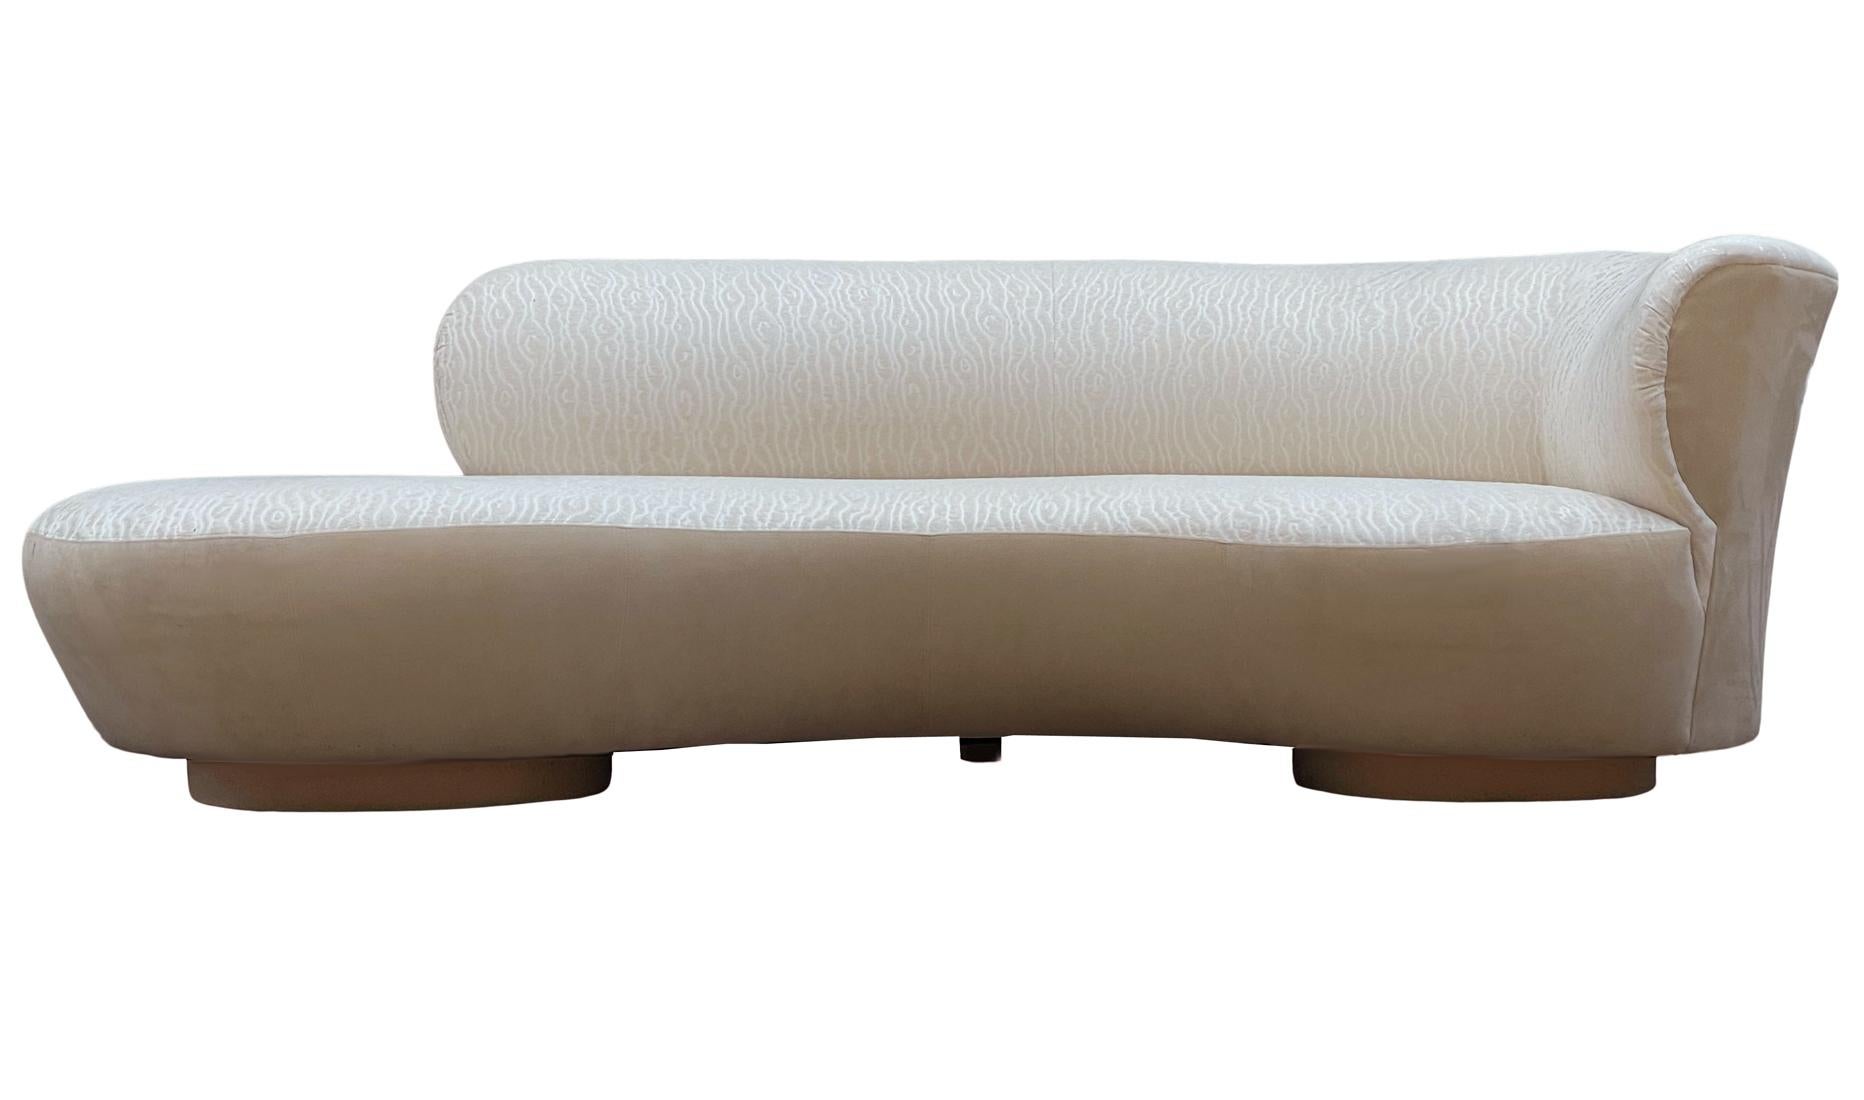 Mid Century Modern Curved Sculptural Serpentine Cloud Sofa or Chaise Lounge In Good Condition For Sale In Philadelphia, PA